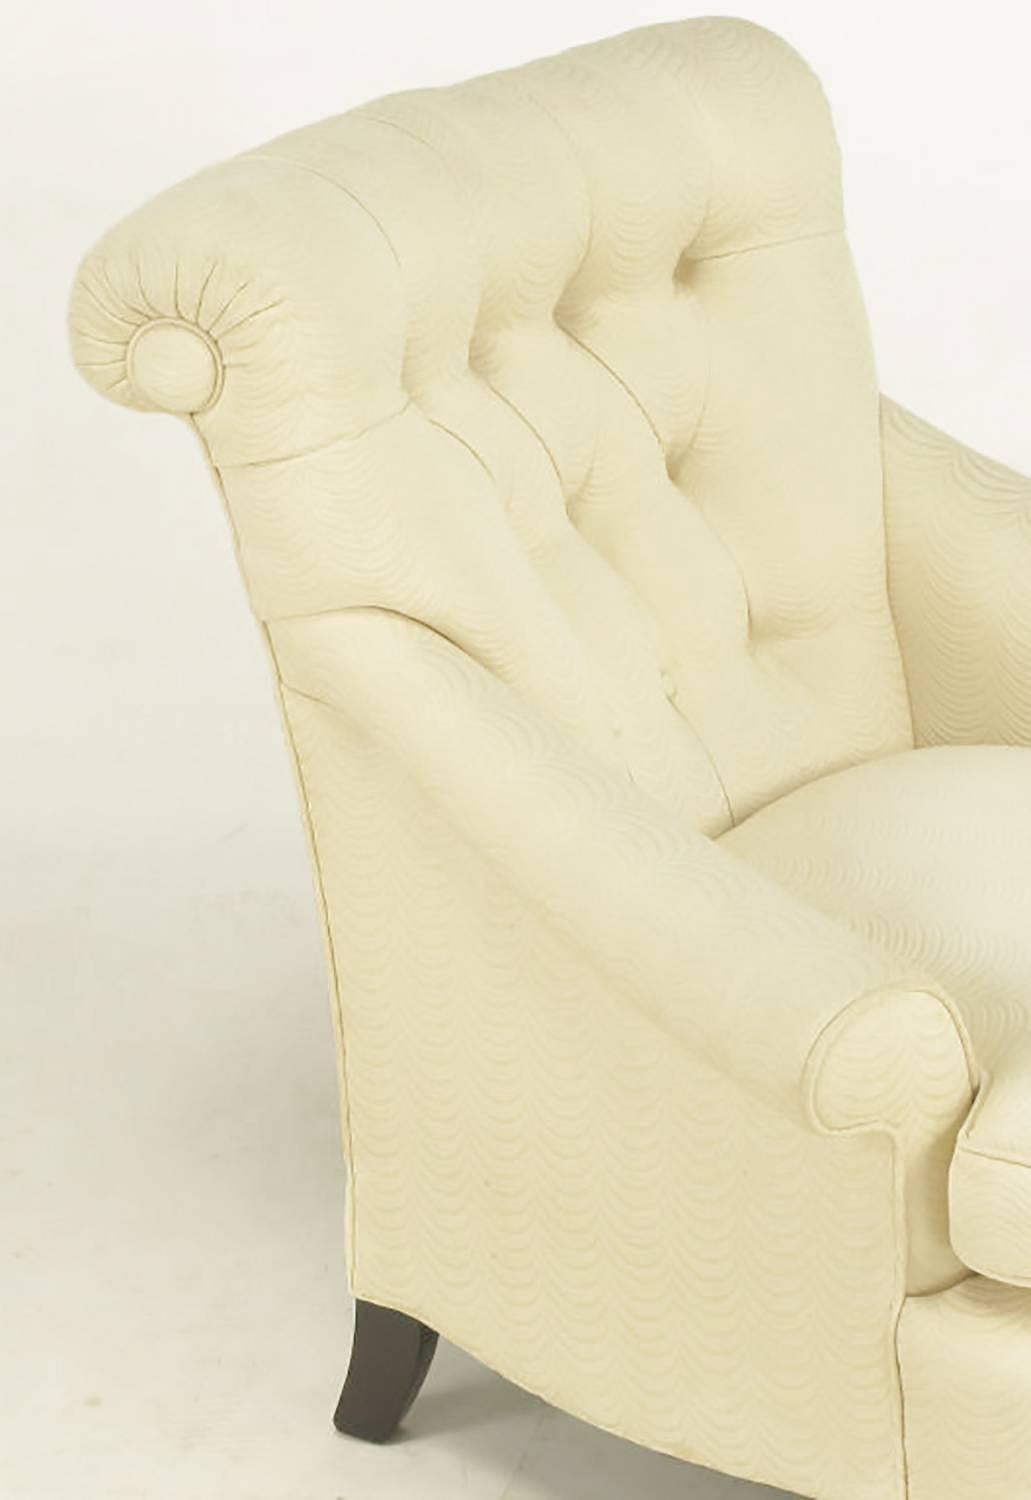 tufted back chair